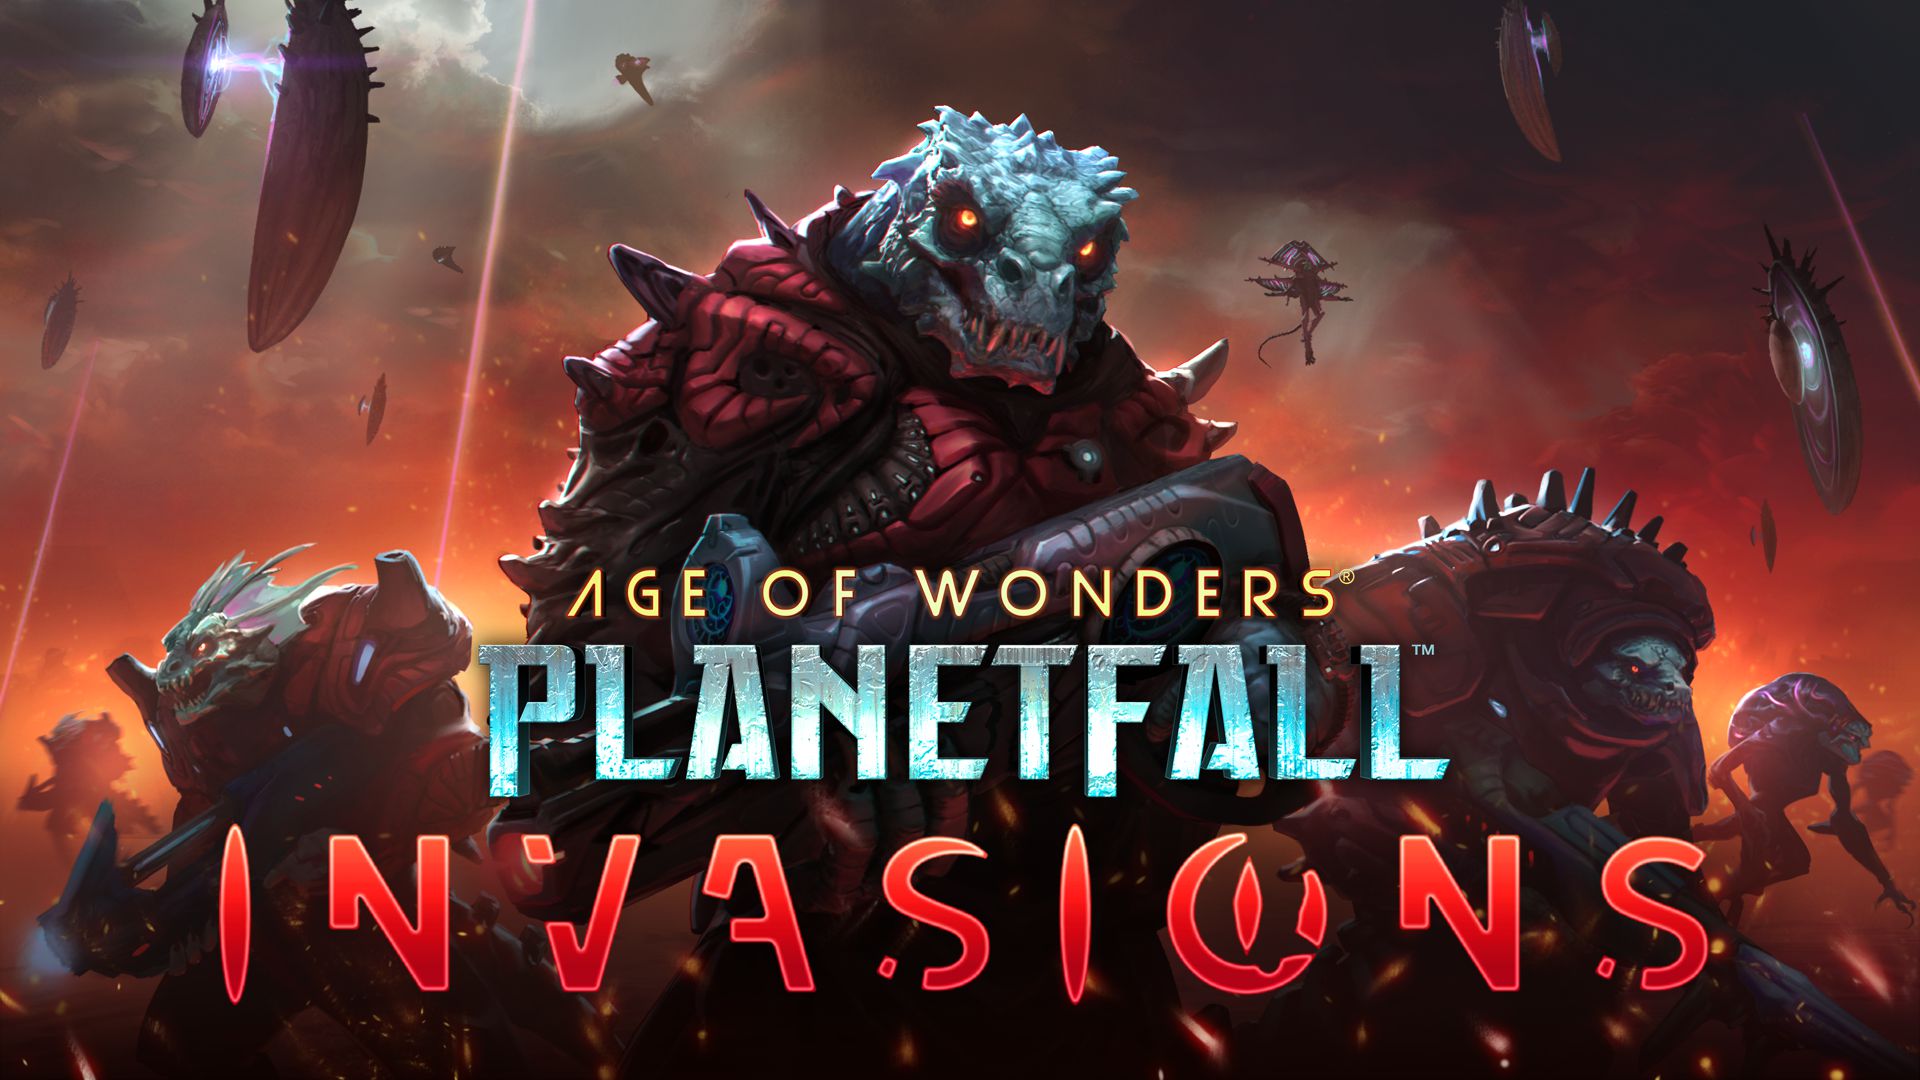 Age of Wonders Planetfall - Invasions